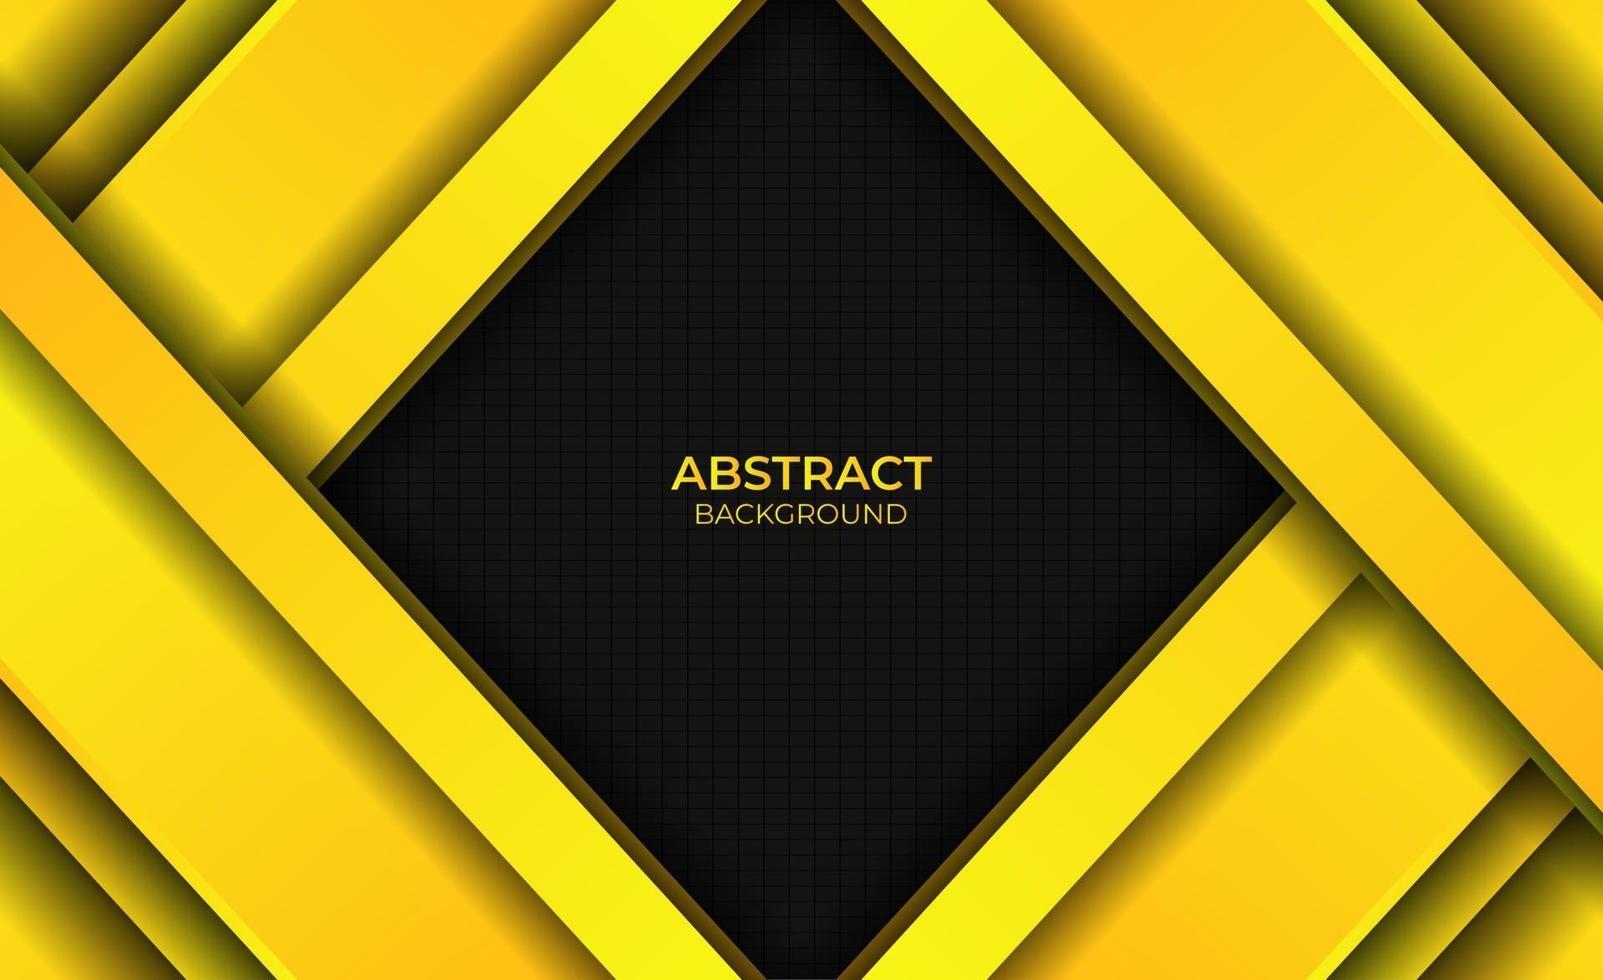 Background Design Gradient Bright Yellow Abstract Style vector